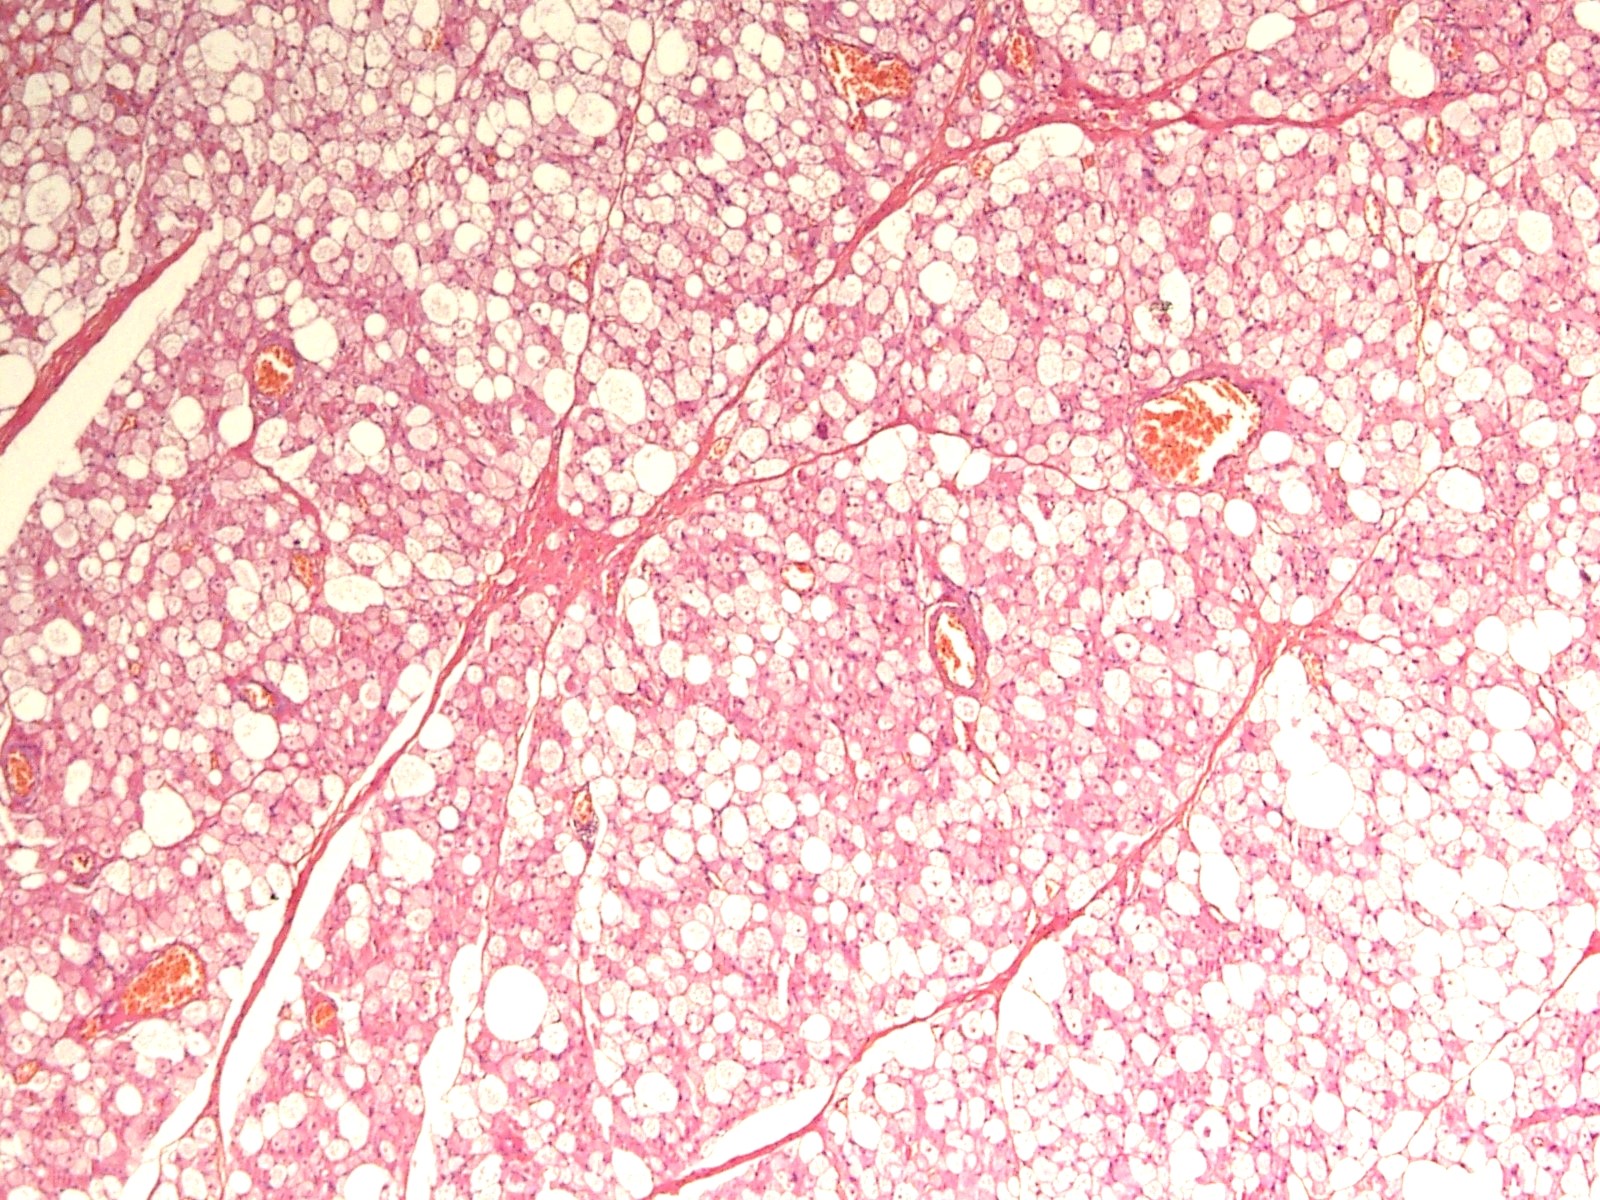 Sheets of brown cells and vasculature